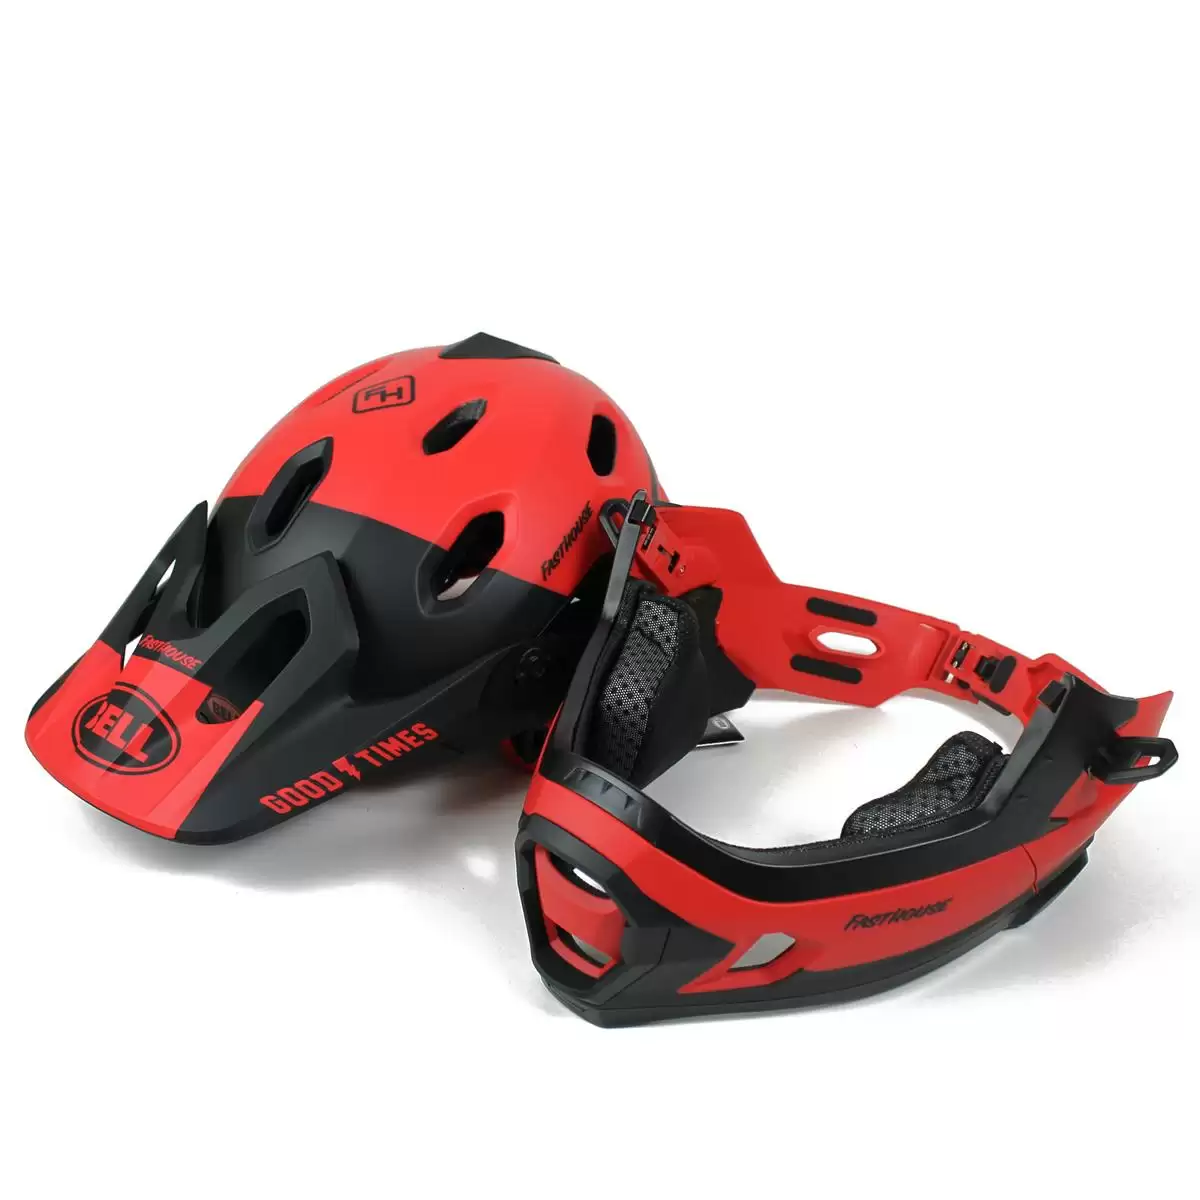 Helmet Super DH MIPS Fasthouse Red Size M (55-59cm) #9